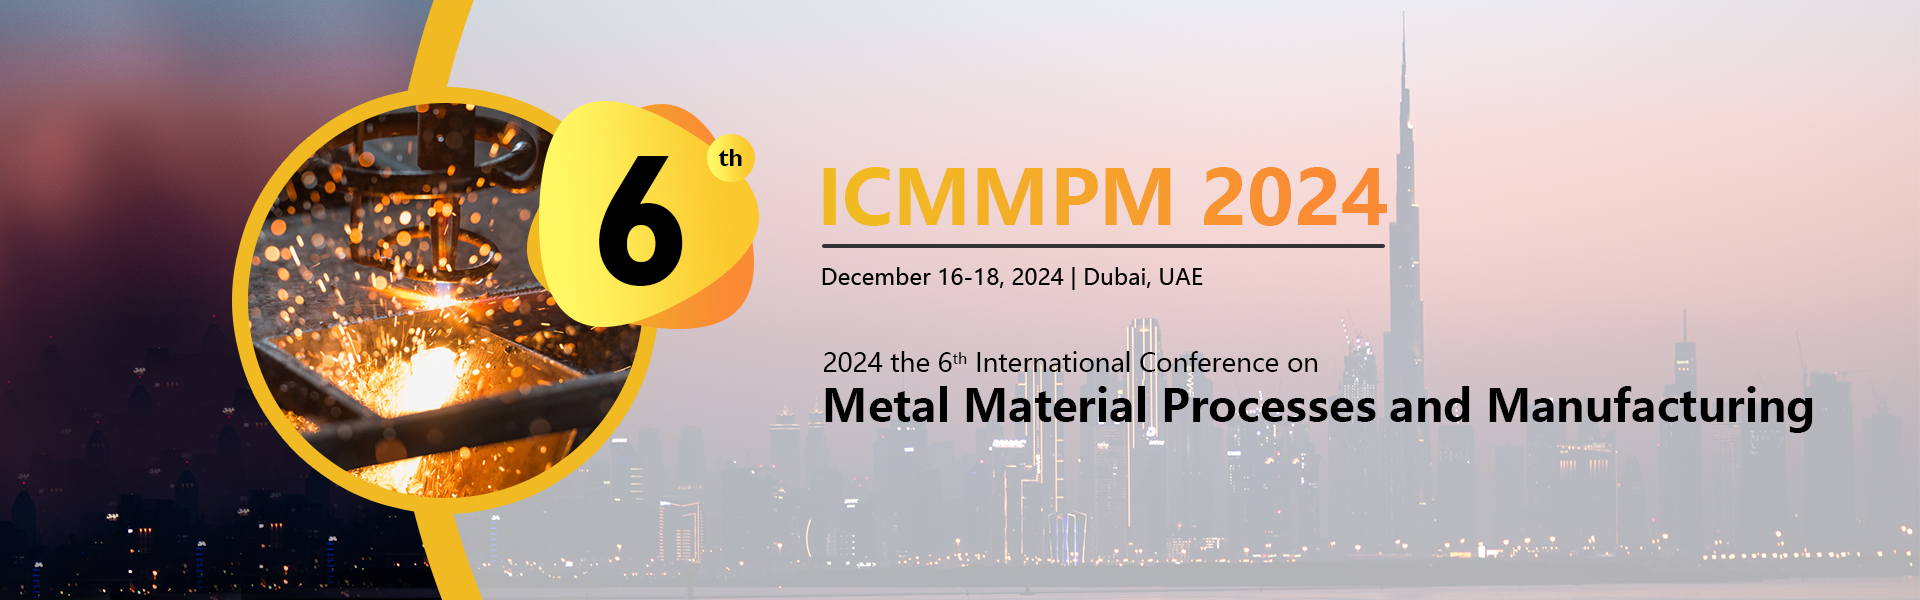 The 6th International Conference on Metal Material Processes and Manufacturing ICMMPM 2024